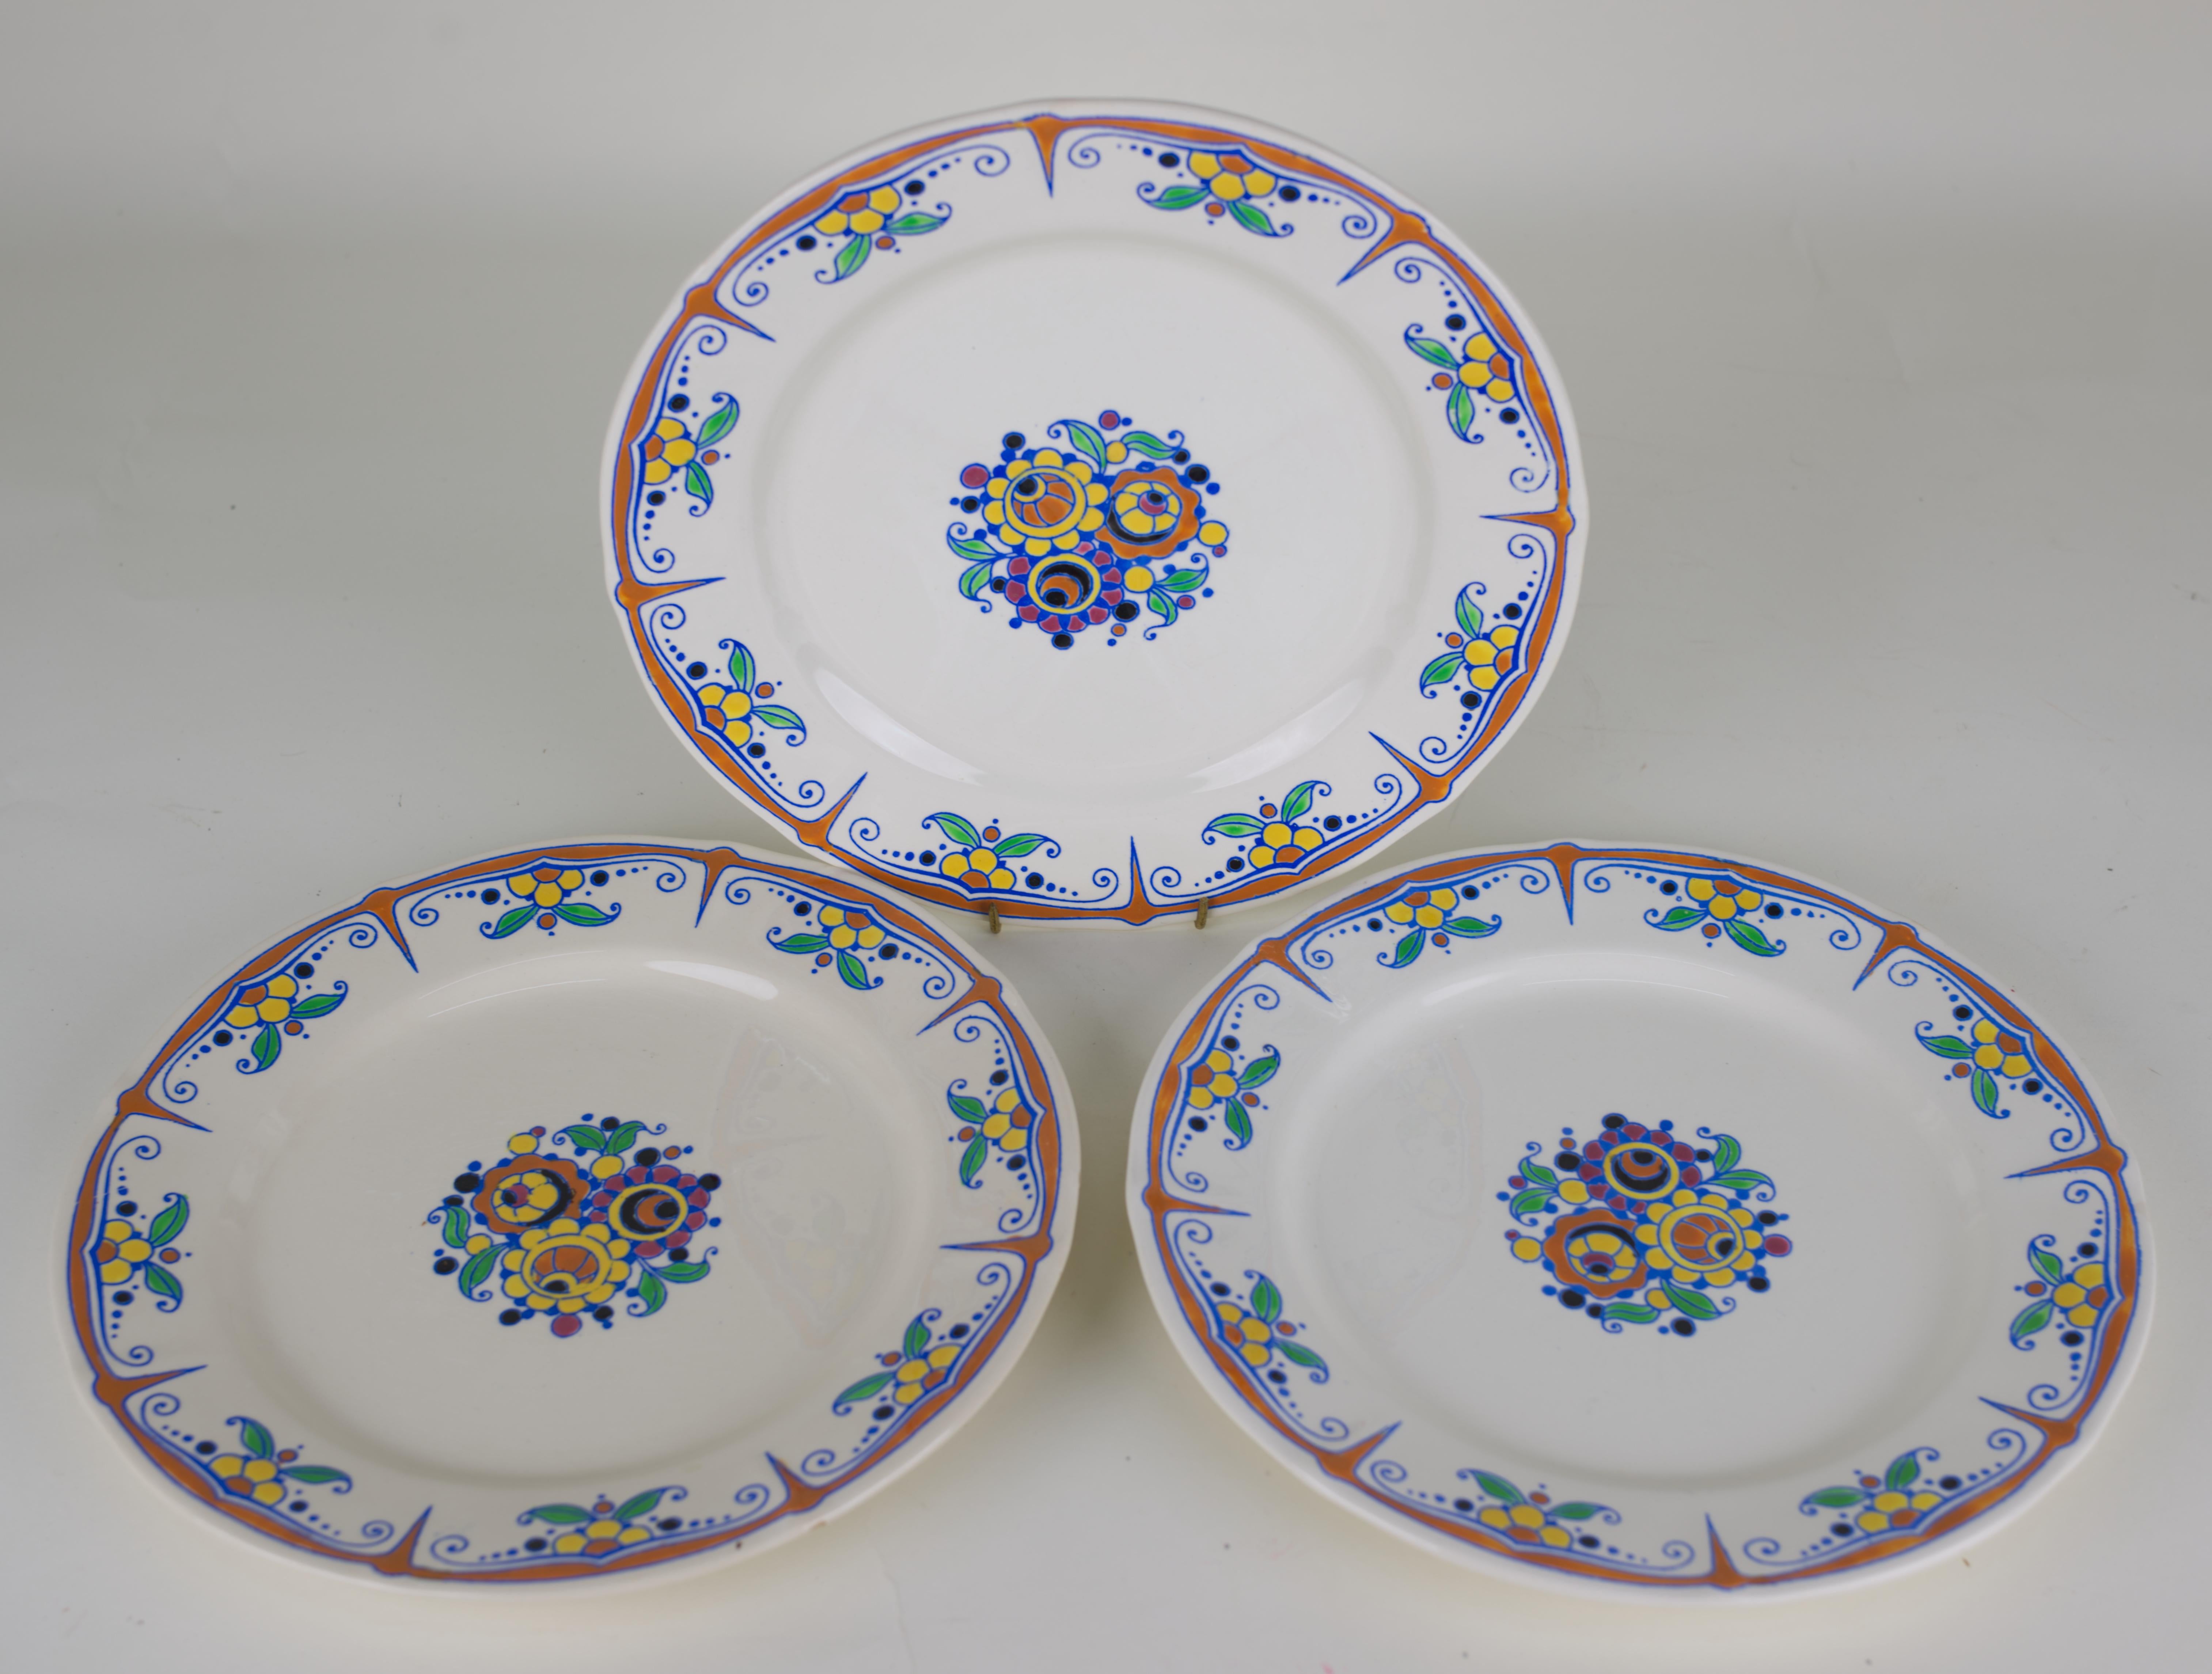 Three extremely rare faience dinner plates are hand-painted on ecru background with Art Deco style orange and yellow flowers and green leaves. This design was widely used on various vases signed by Charles Catteau; there are multiple examples in